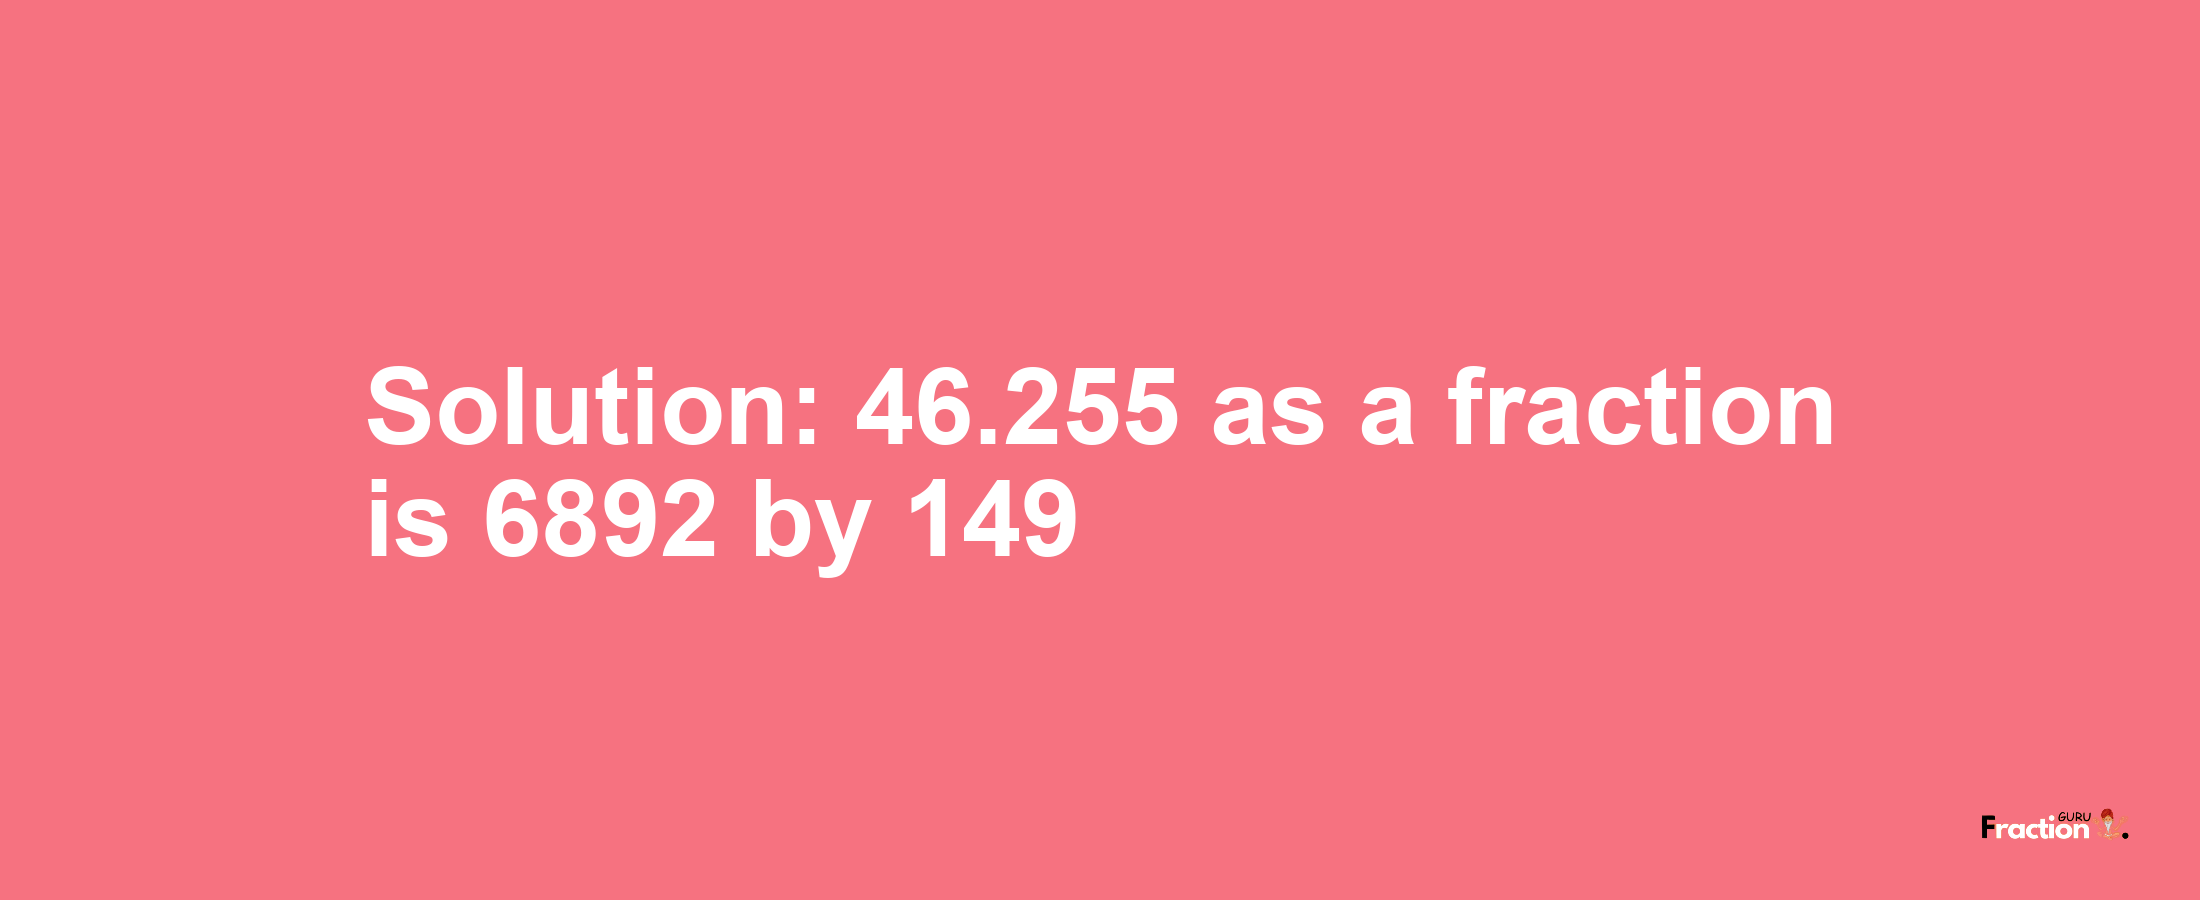 Solution:46.255 as a fraction is 6892/149